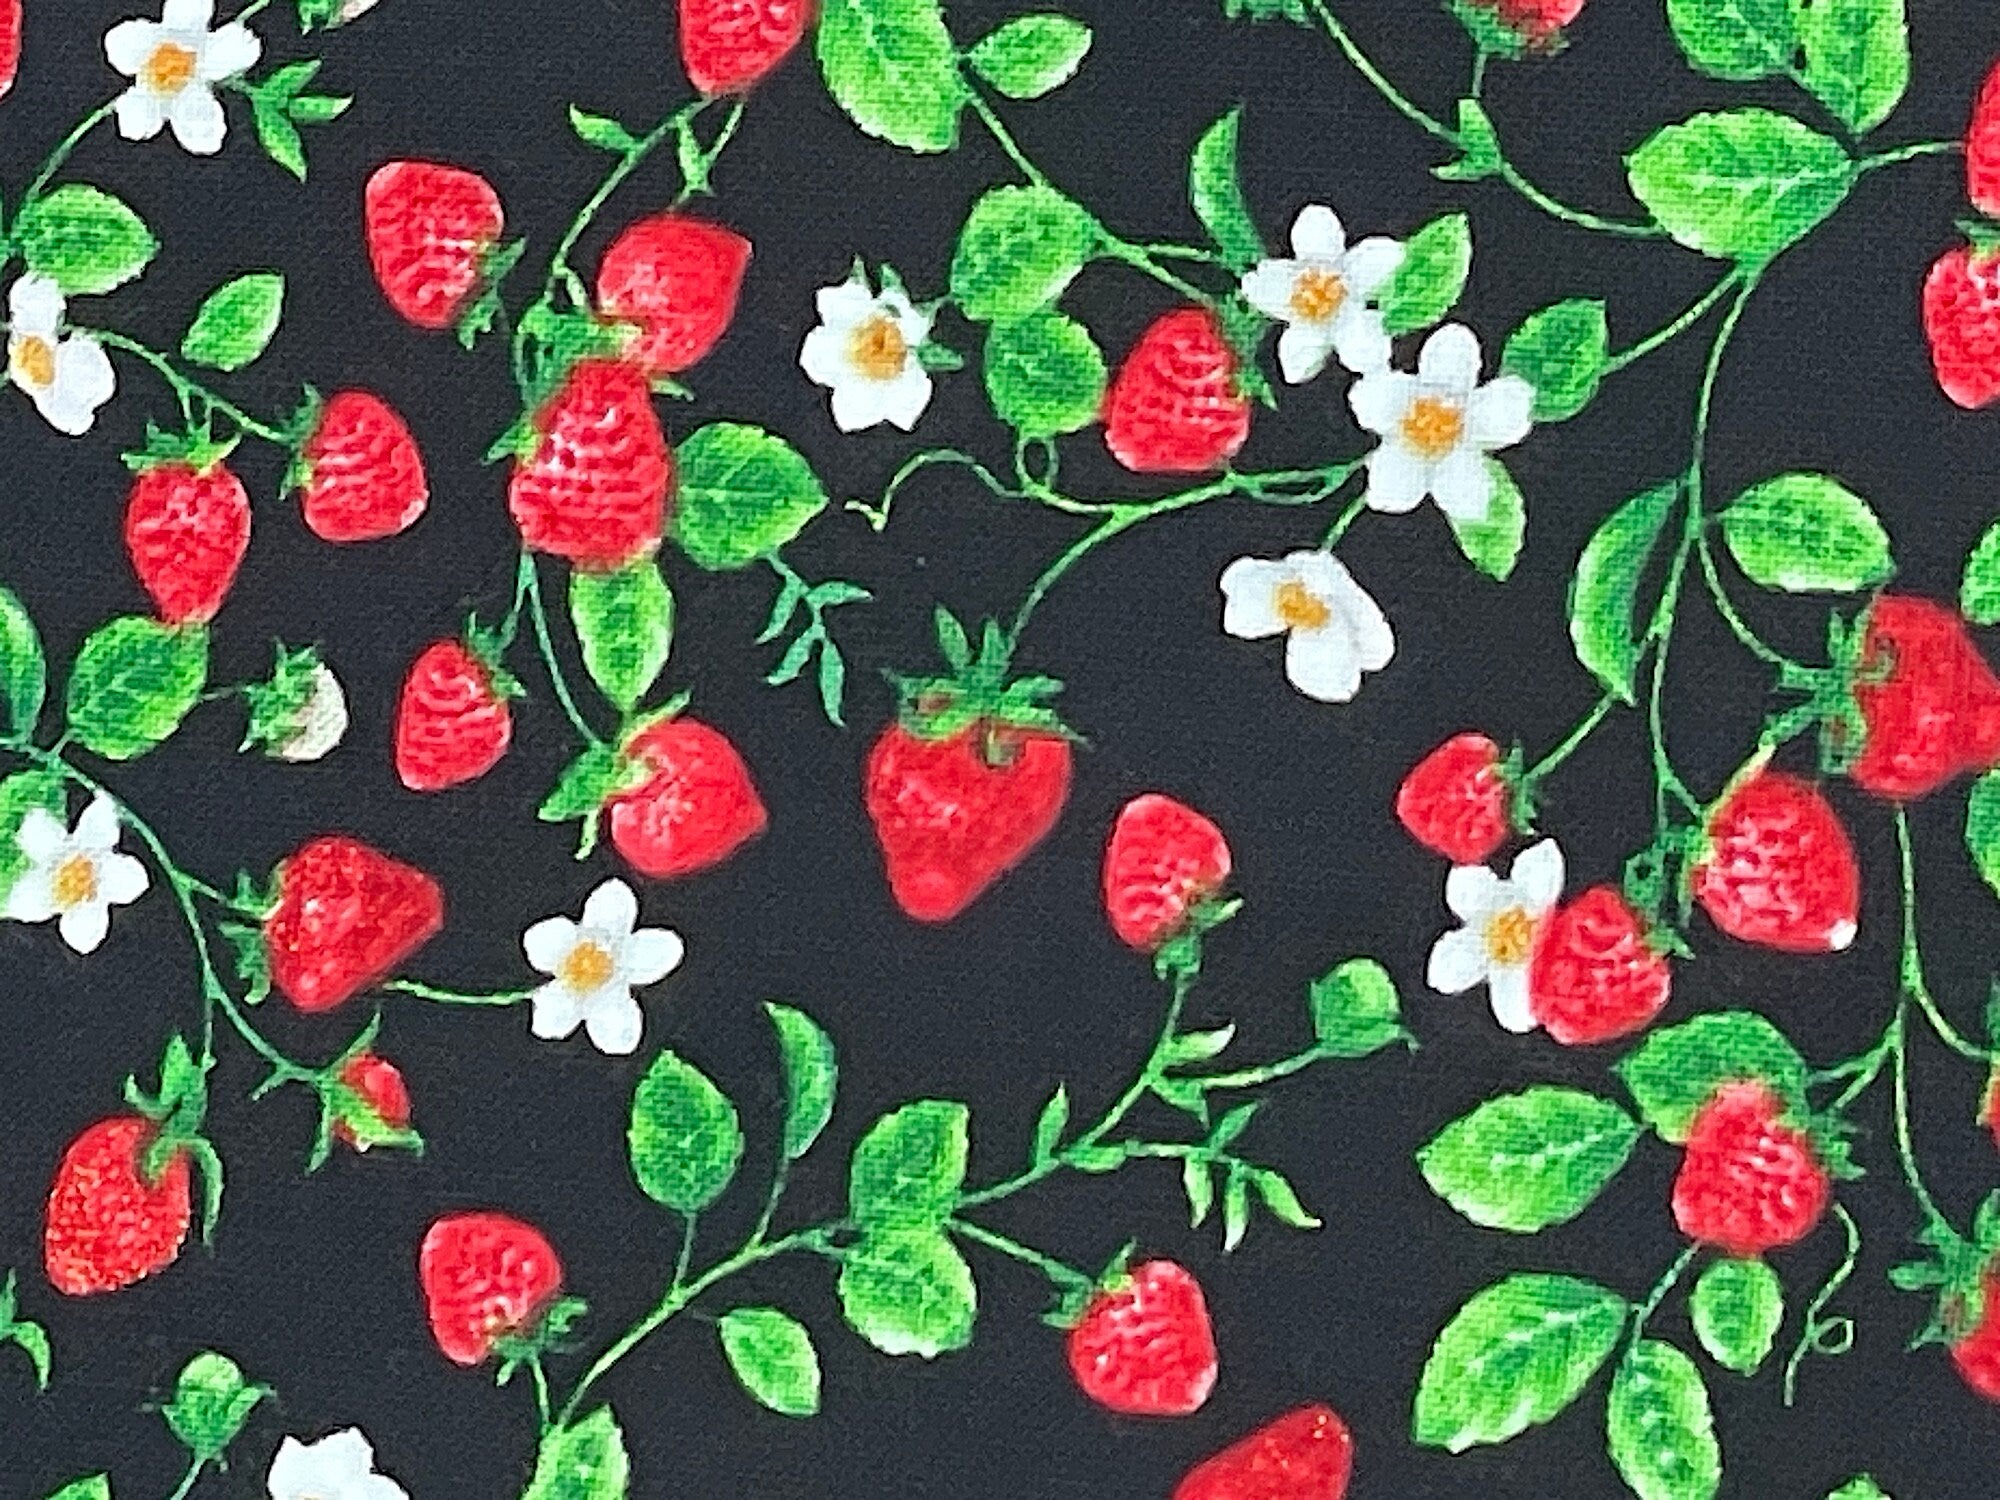 Close up of strawberries, vines and flowers.